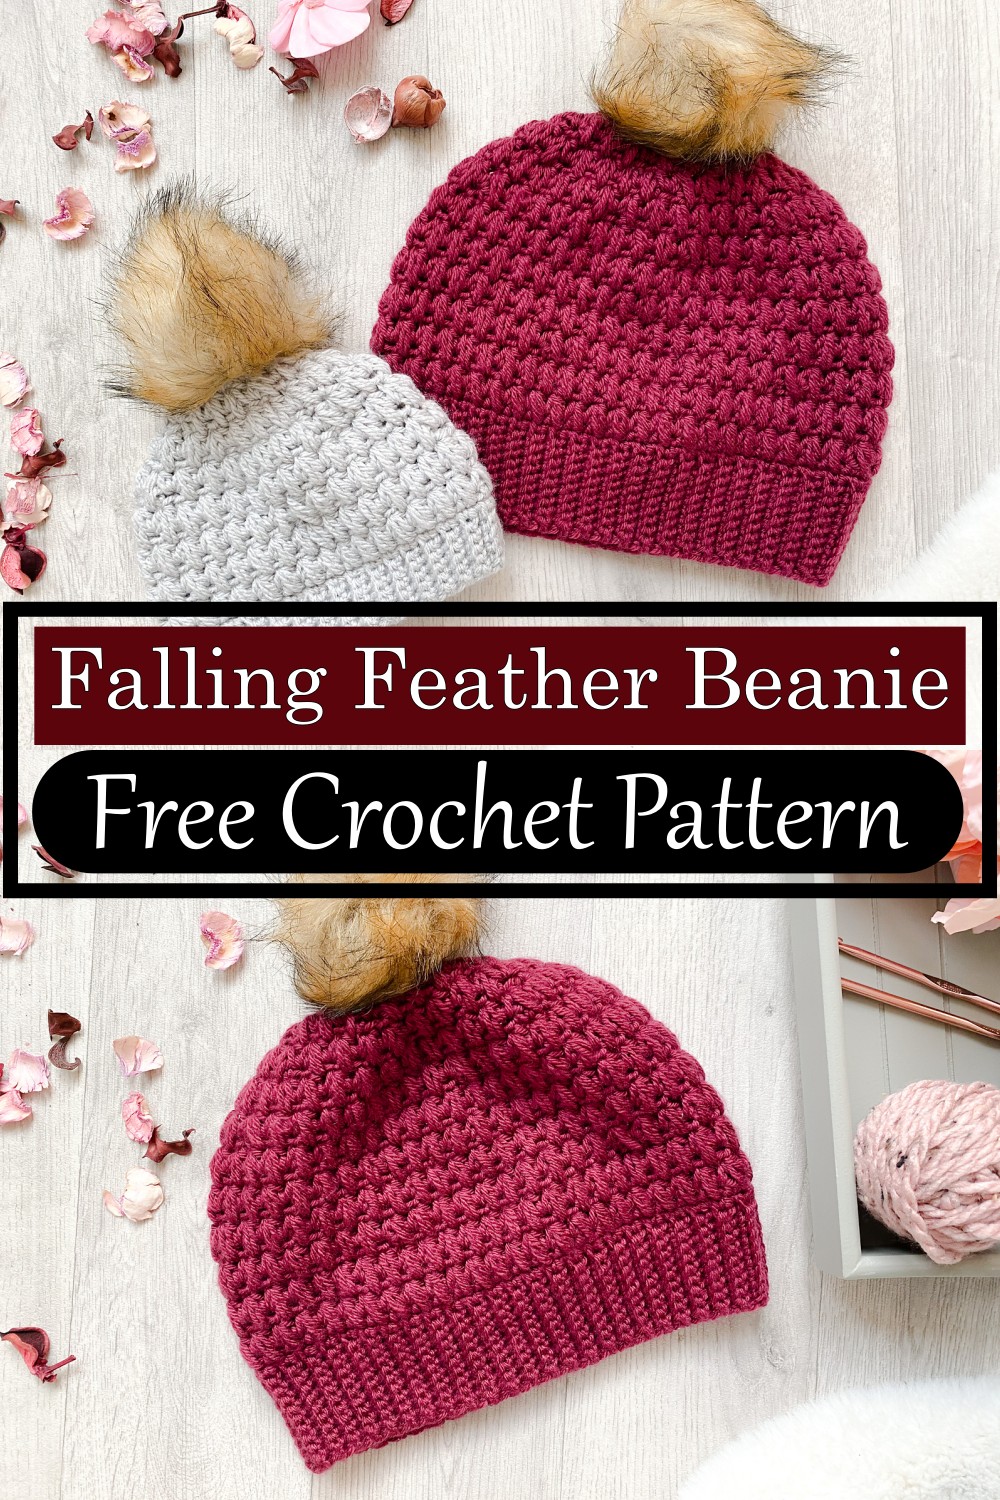 Falling Feather Beanie